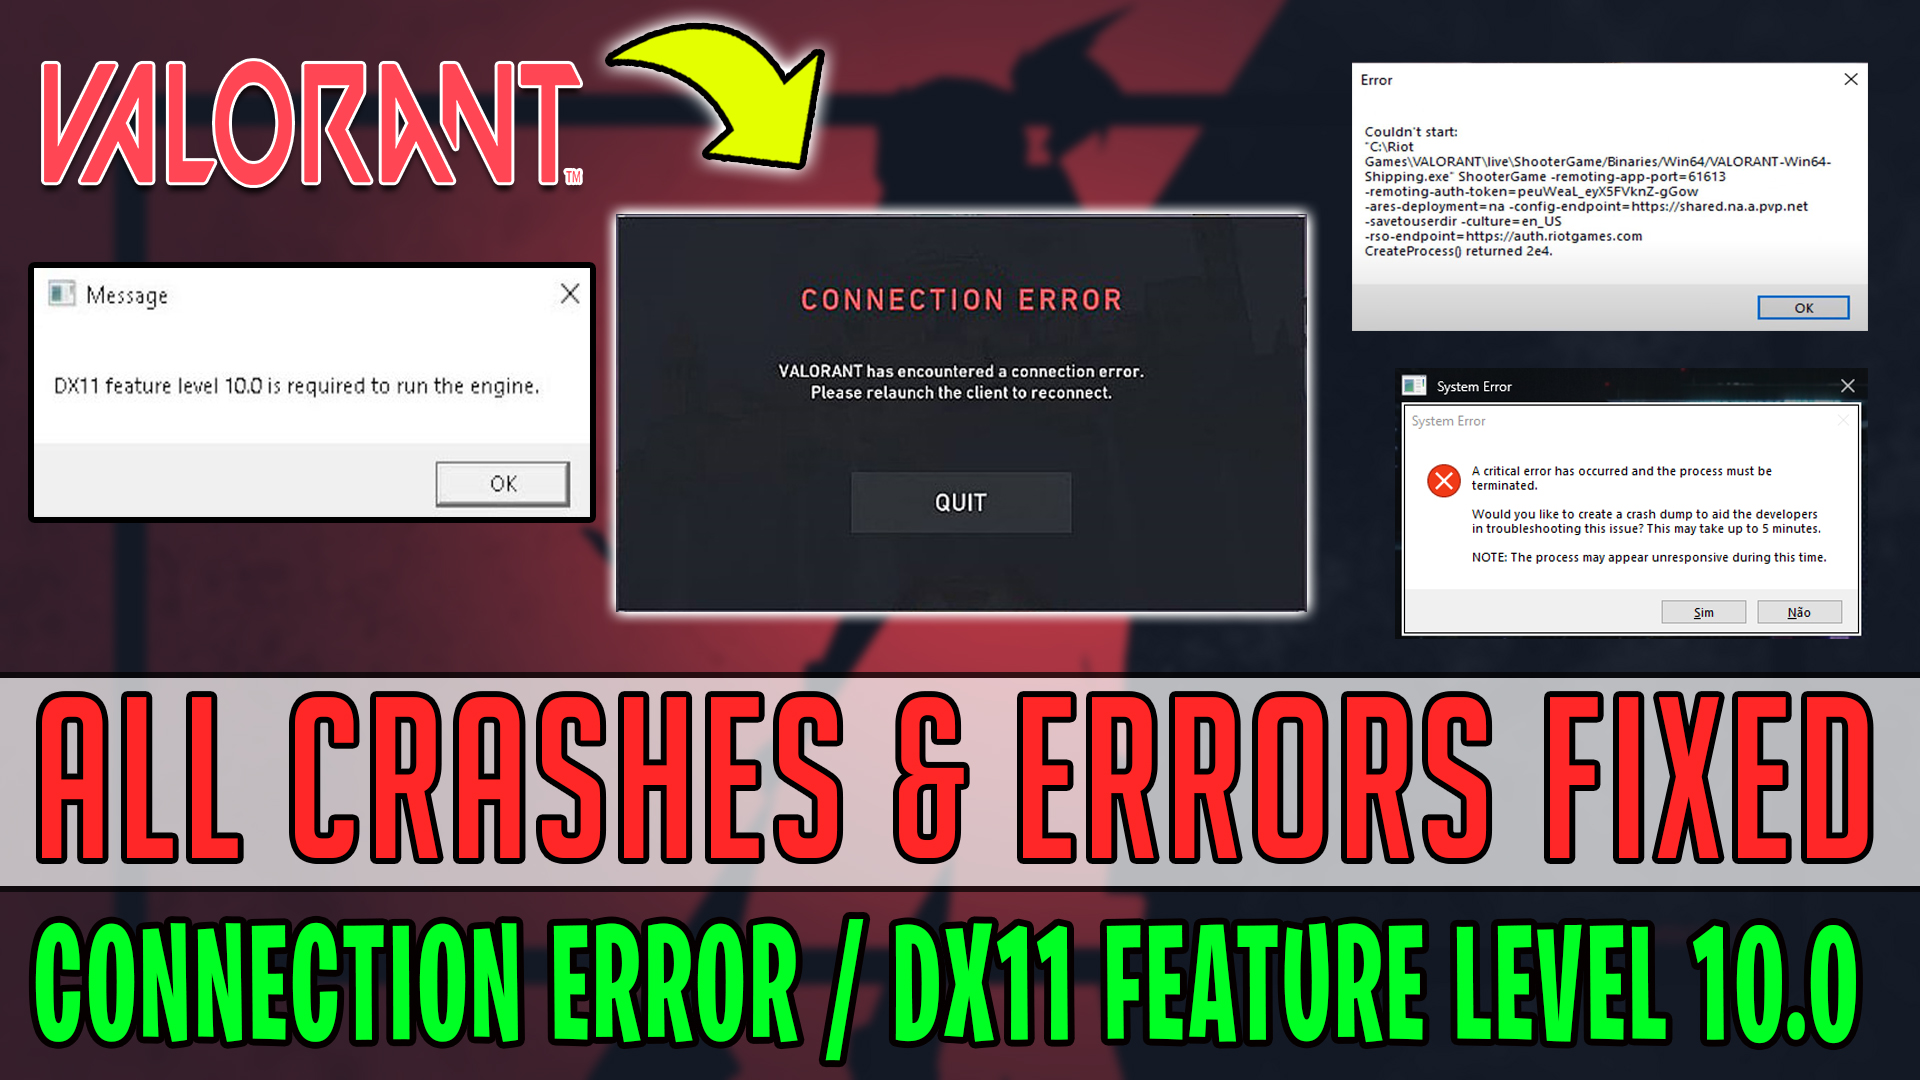 Dx11 feature 10.0 is required to Run the engine. Валорант dx11 feature Level 10.0 is required to Run the engine. DX 11 feature Level 10.0 is required Run the engine решение. Critical Error has occurred valorant.